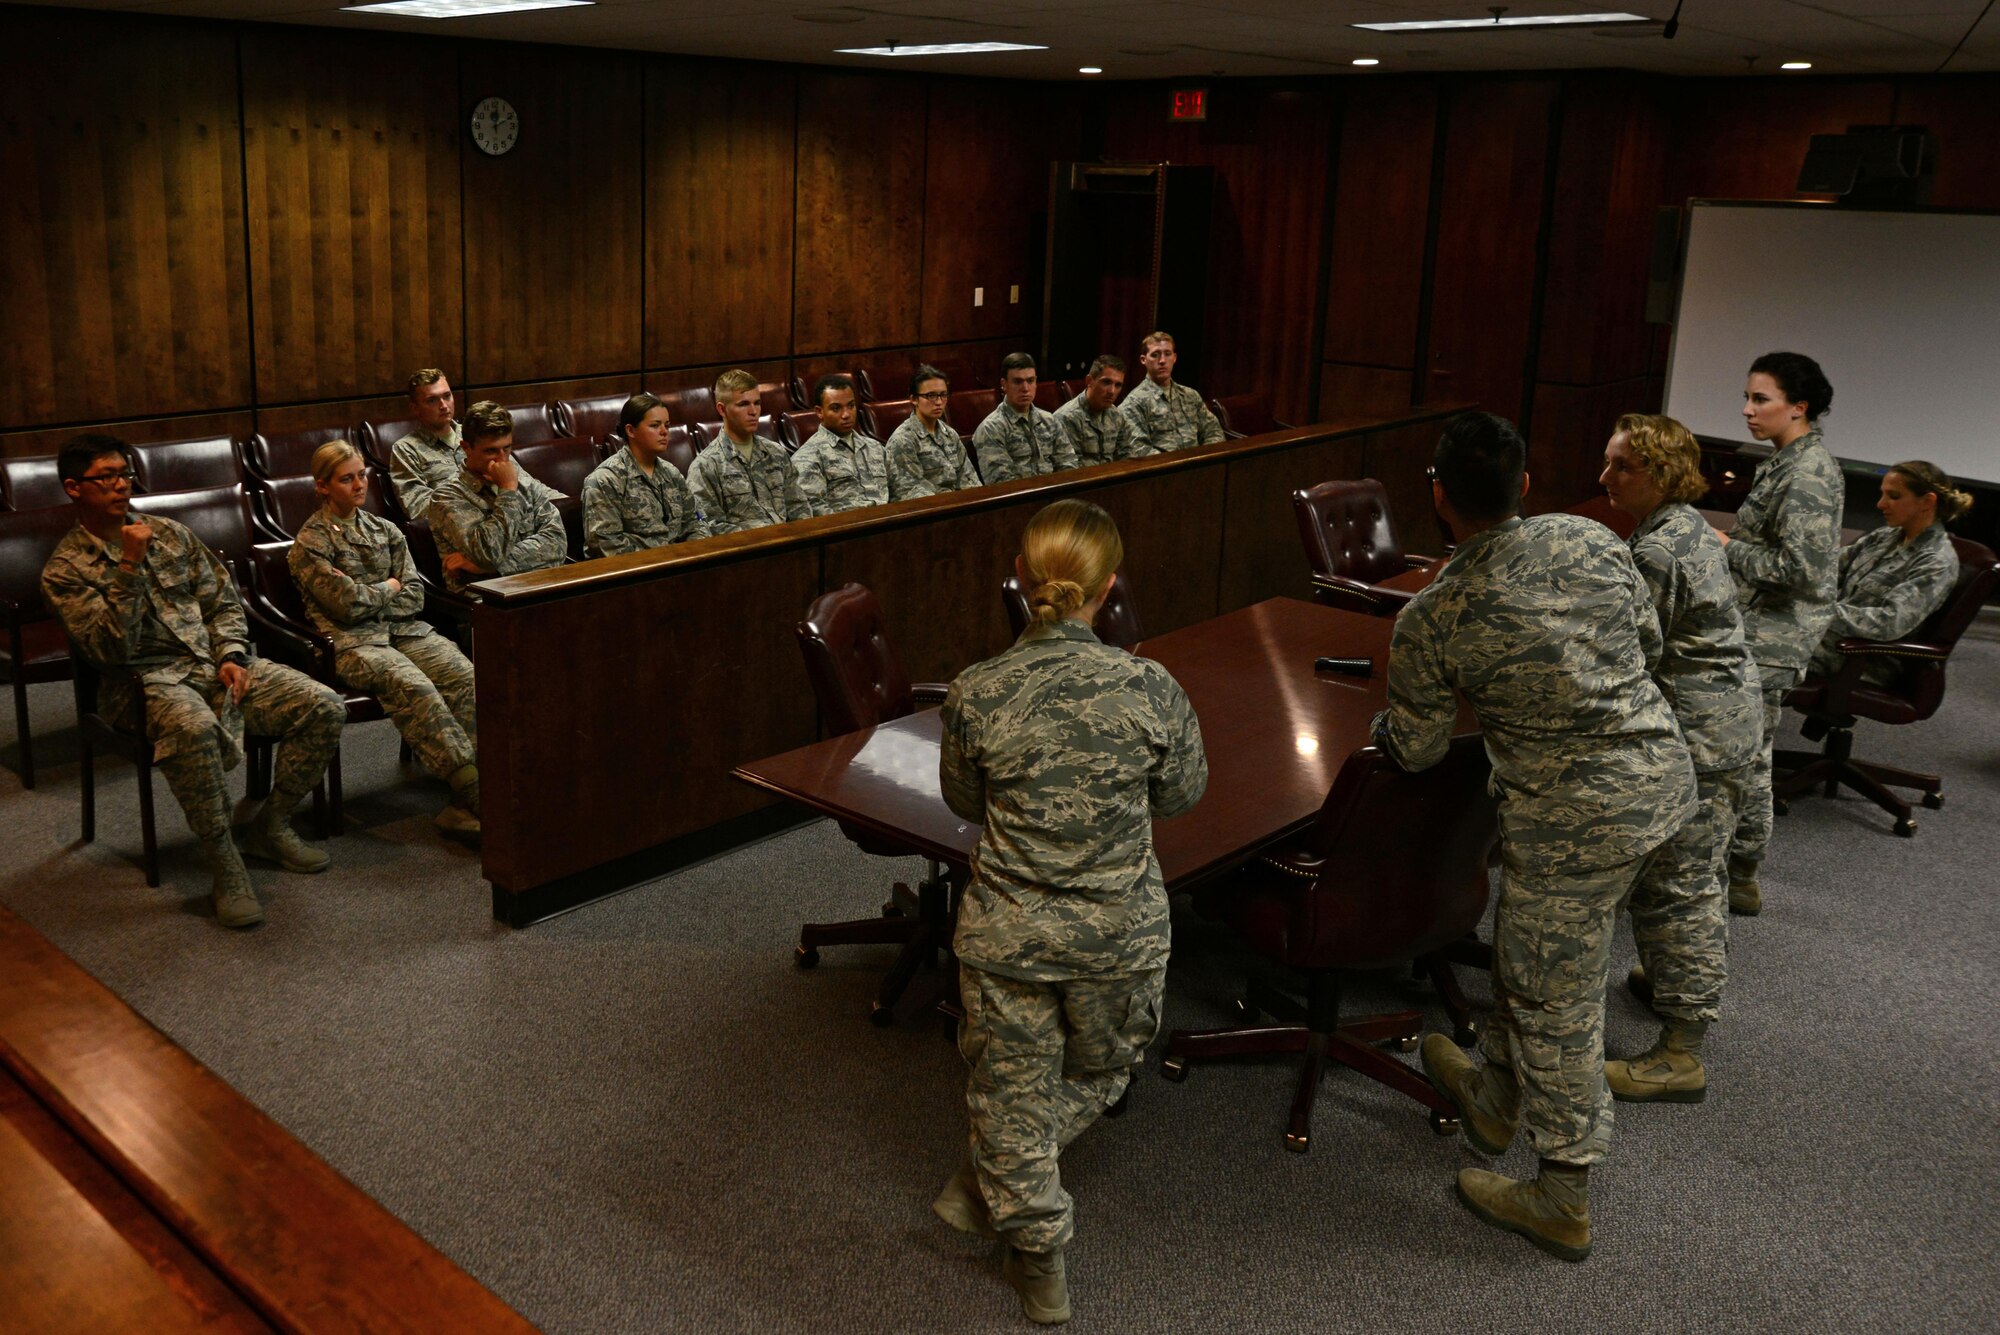 U.S. Airmen assigned to the 20th Fighter Wing legal office speak with U.S. Air Force Academy Cadets at Shaw Air Force Base, S.C., June 9, 2017. The Airmen spoke about why they decided to become legal officers and the day-to-day tasks required of them. (U.S. Air Force Airman 1st Class Kathryn R.C. Reaves)